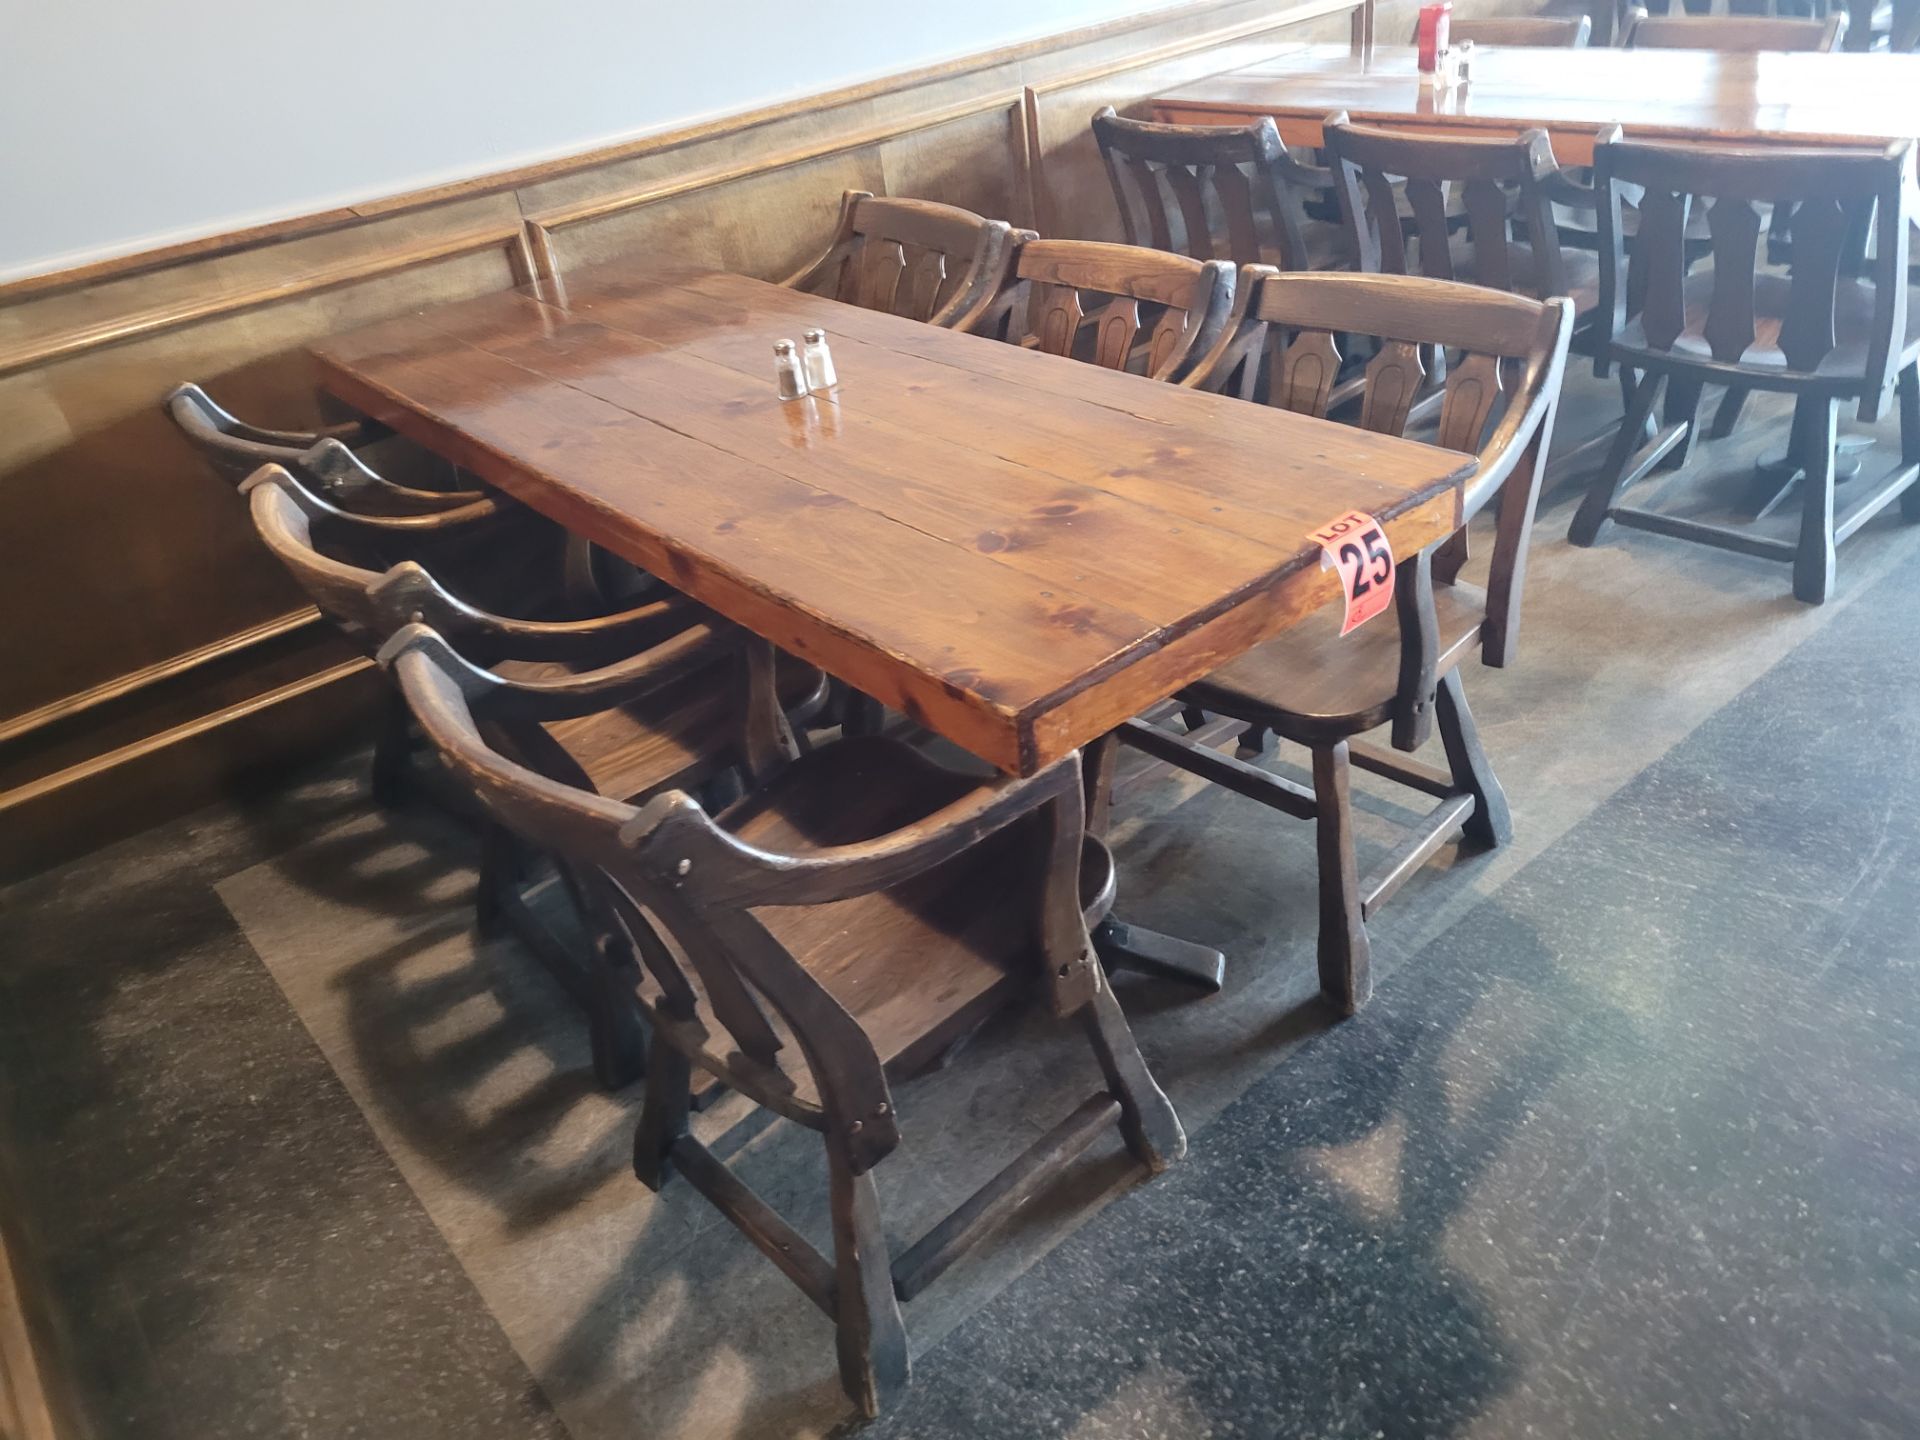 6-Seat varnished hardwood dining table and (6) pub-style wooden chairs - Image 3 of 3